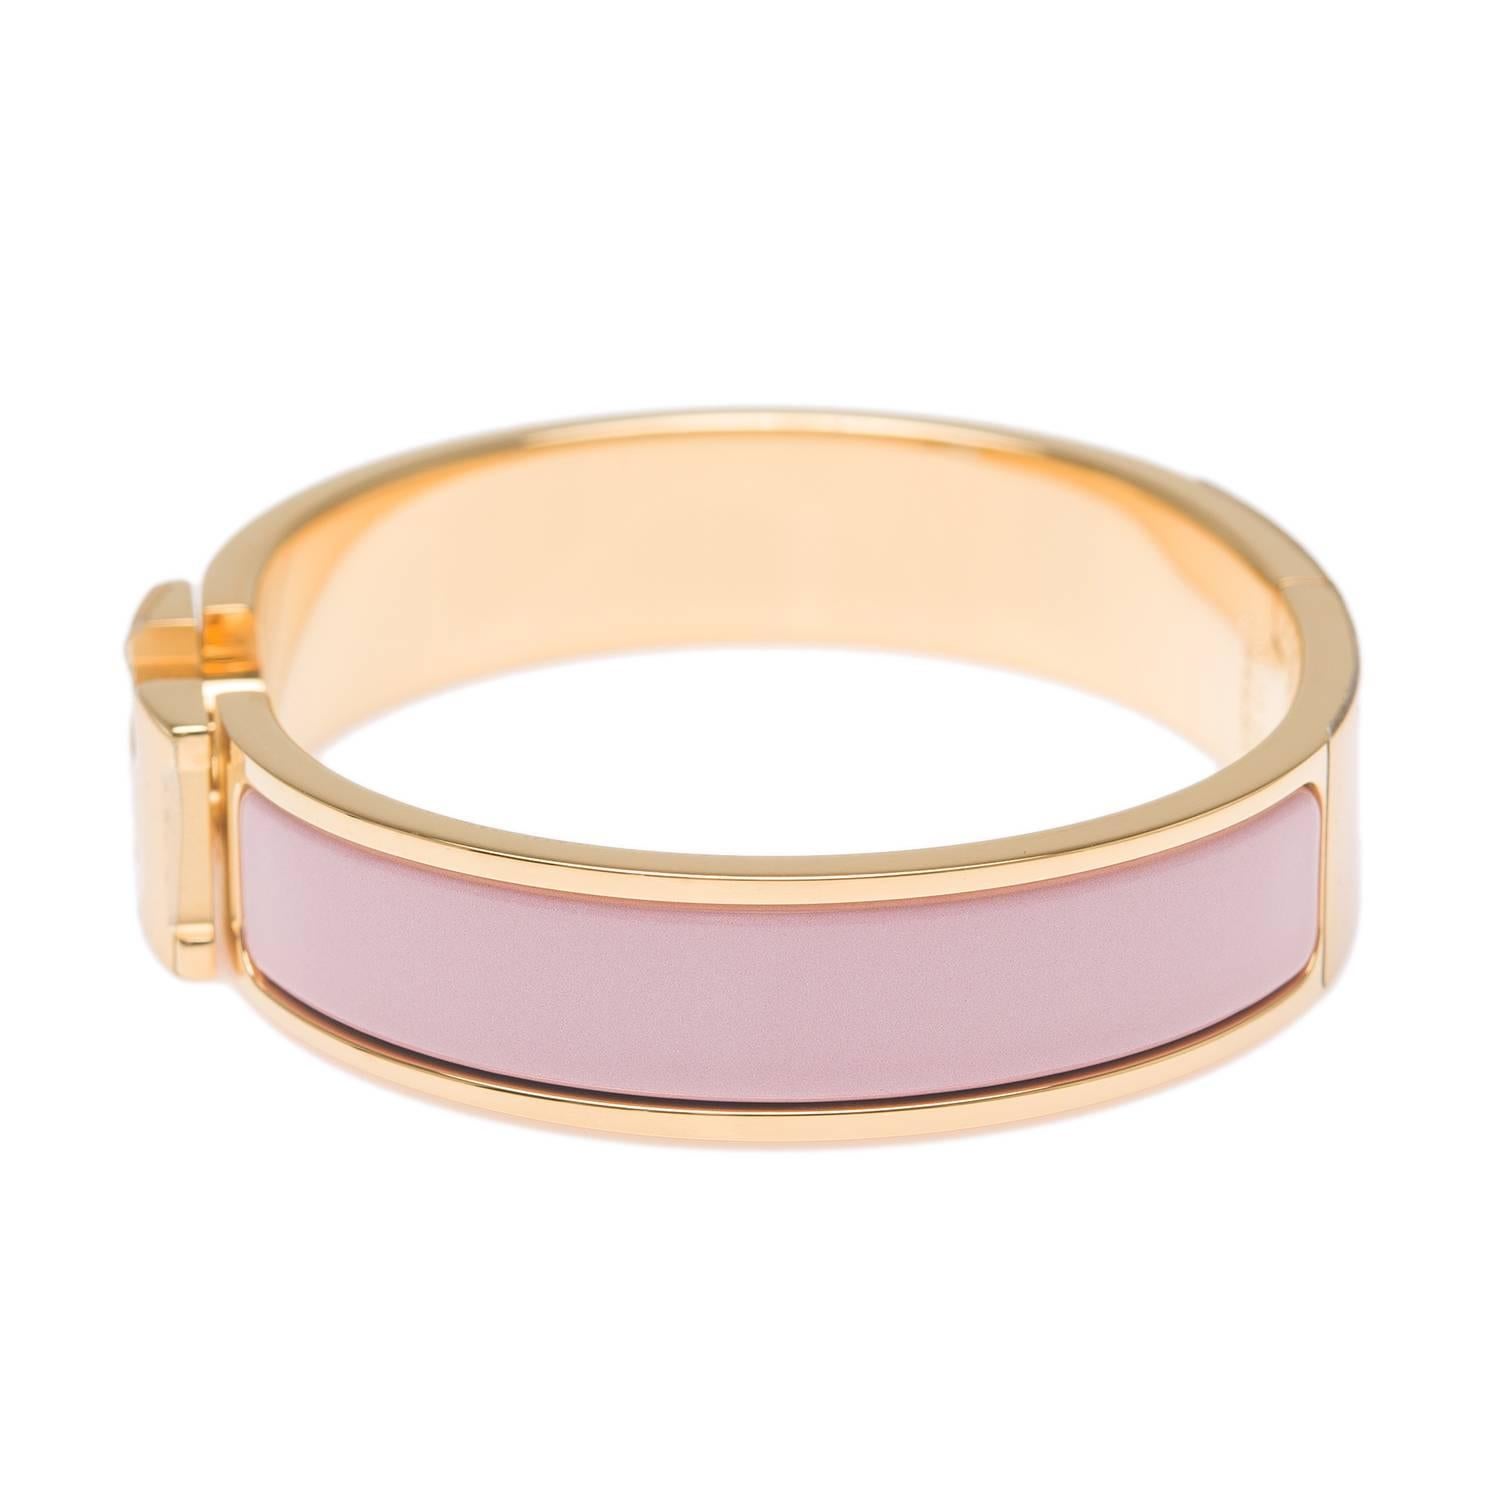 Hermes narrow Clic Clac H bracelet in Rose Nacarat enamel closure with gold plated hardware in size PM.

Origin: France

Condition: Pristine; never worn

Accompanied by: Hermes box, Hermes dustbag, carebook

Measurements: Diameter: 2.25";